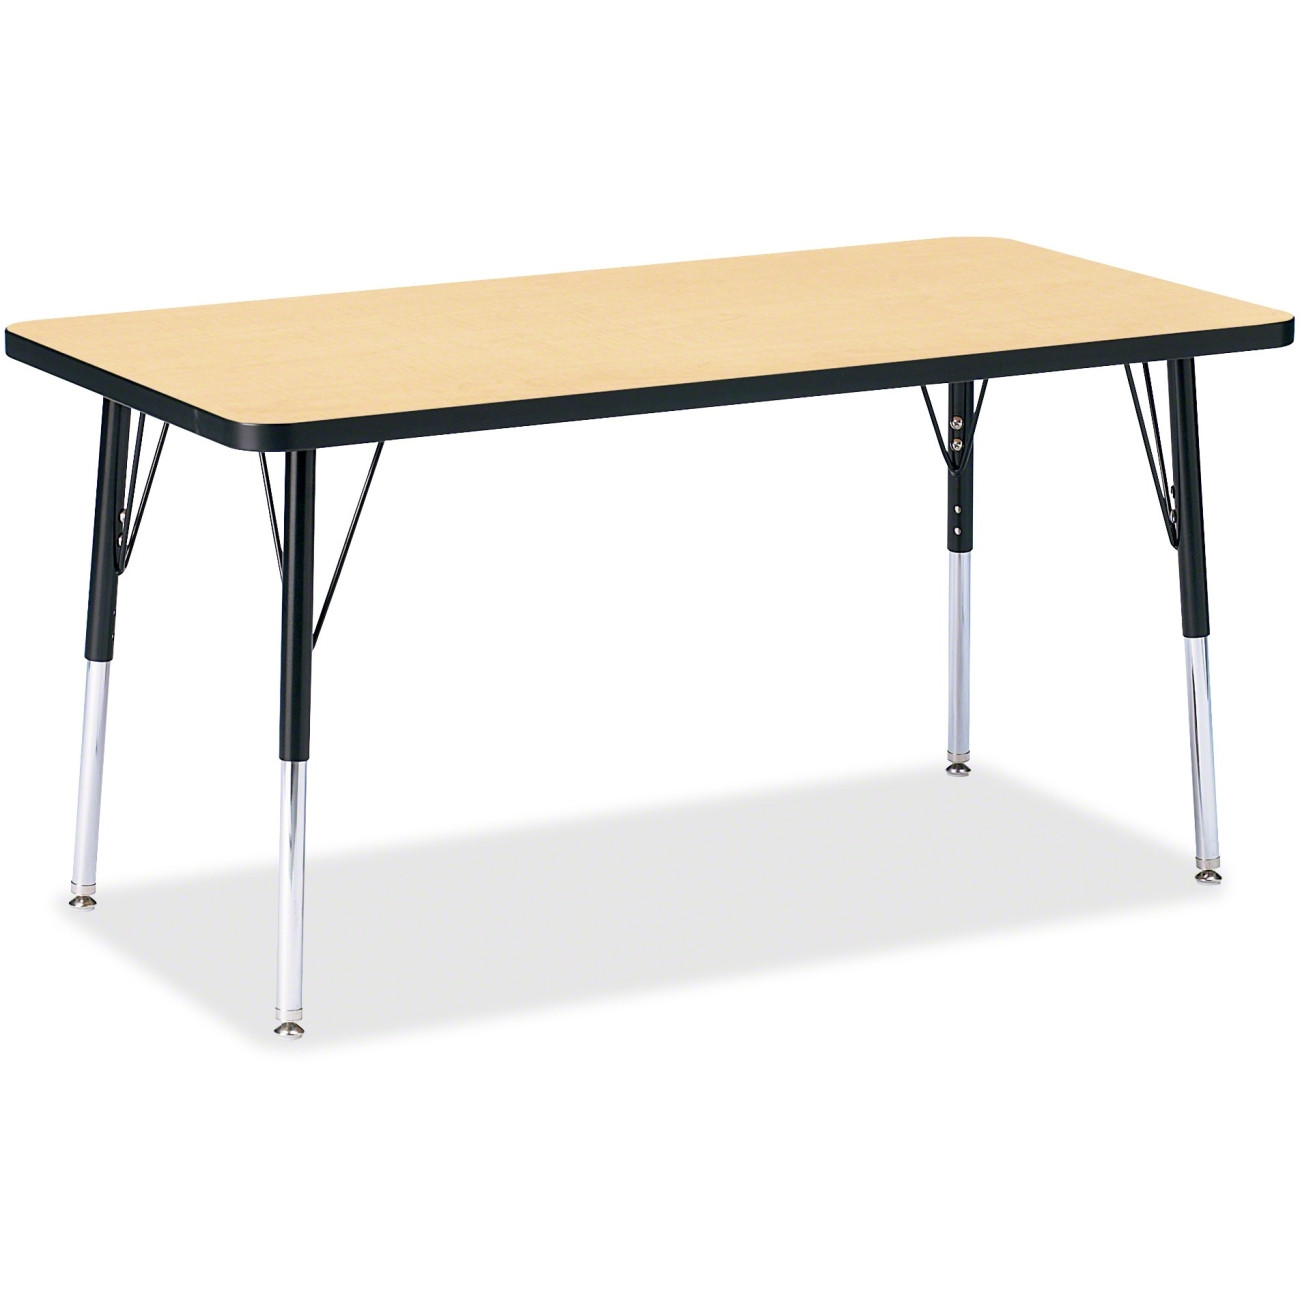 Craft Tables For Adults
 Printer